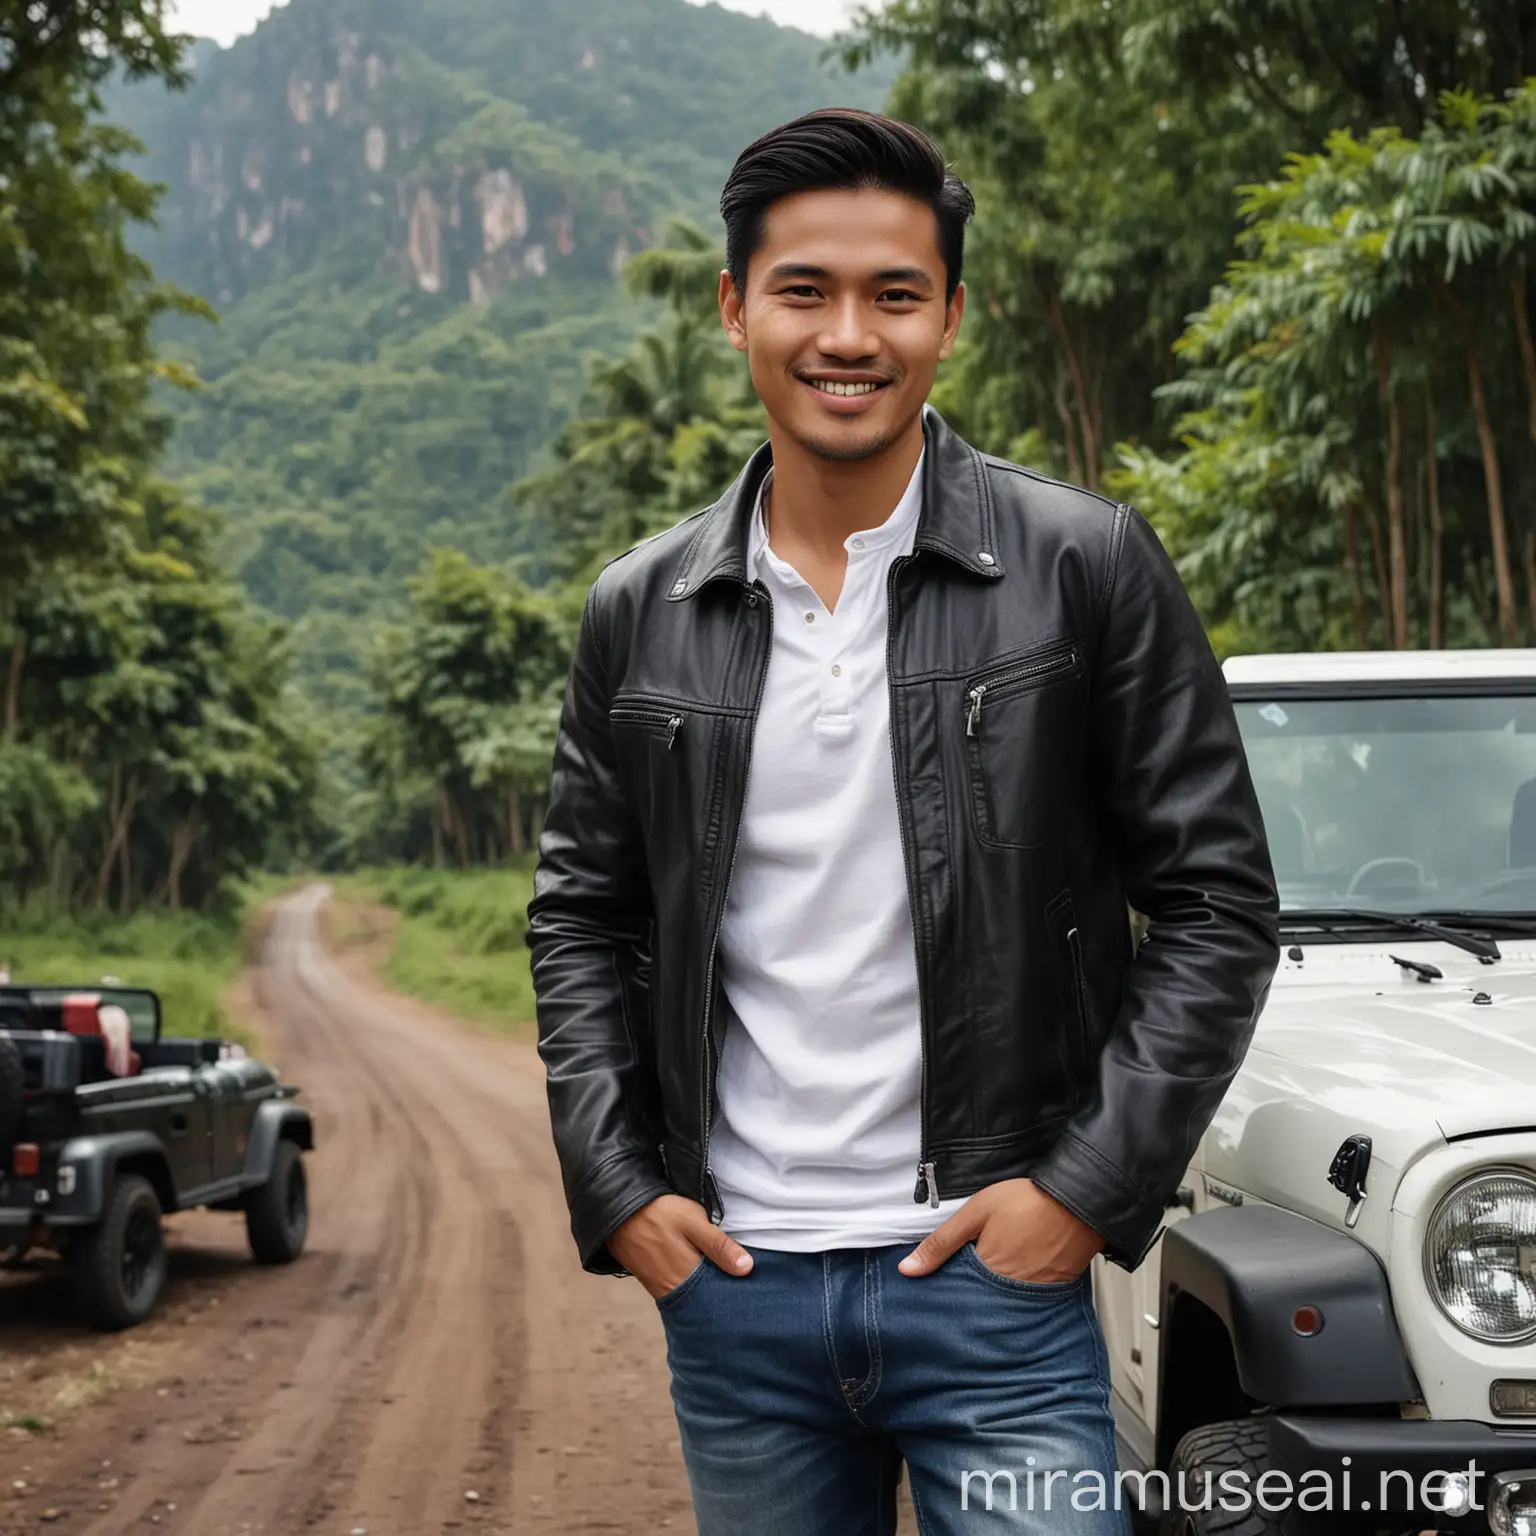 Stylish Young Man Posing with Black Jeep against Mountain Landscape